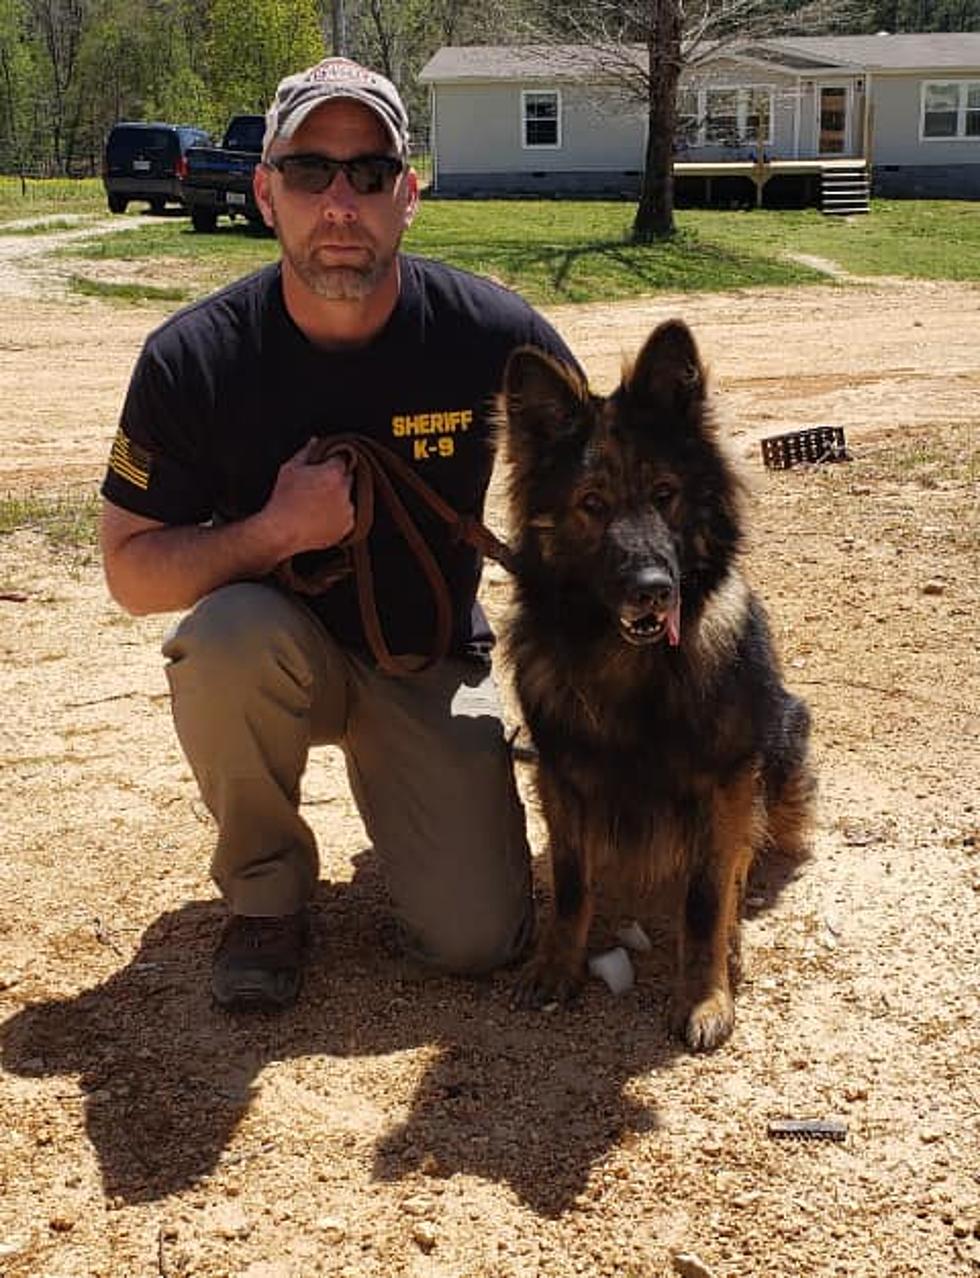 K9 Lord Coming to Pettis County In June